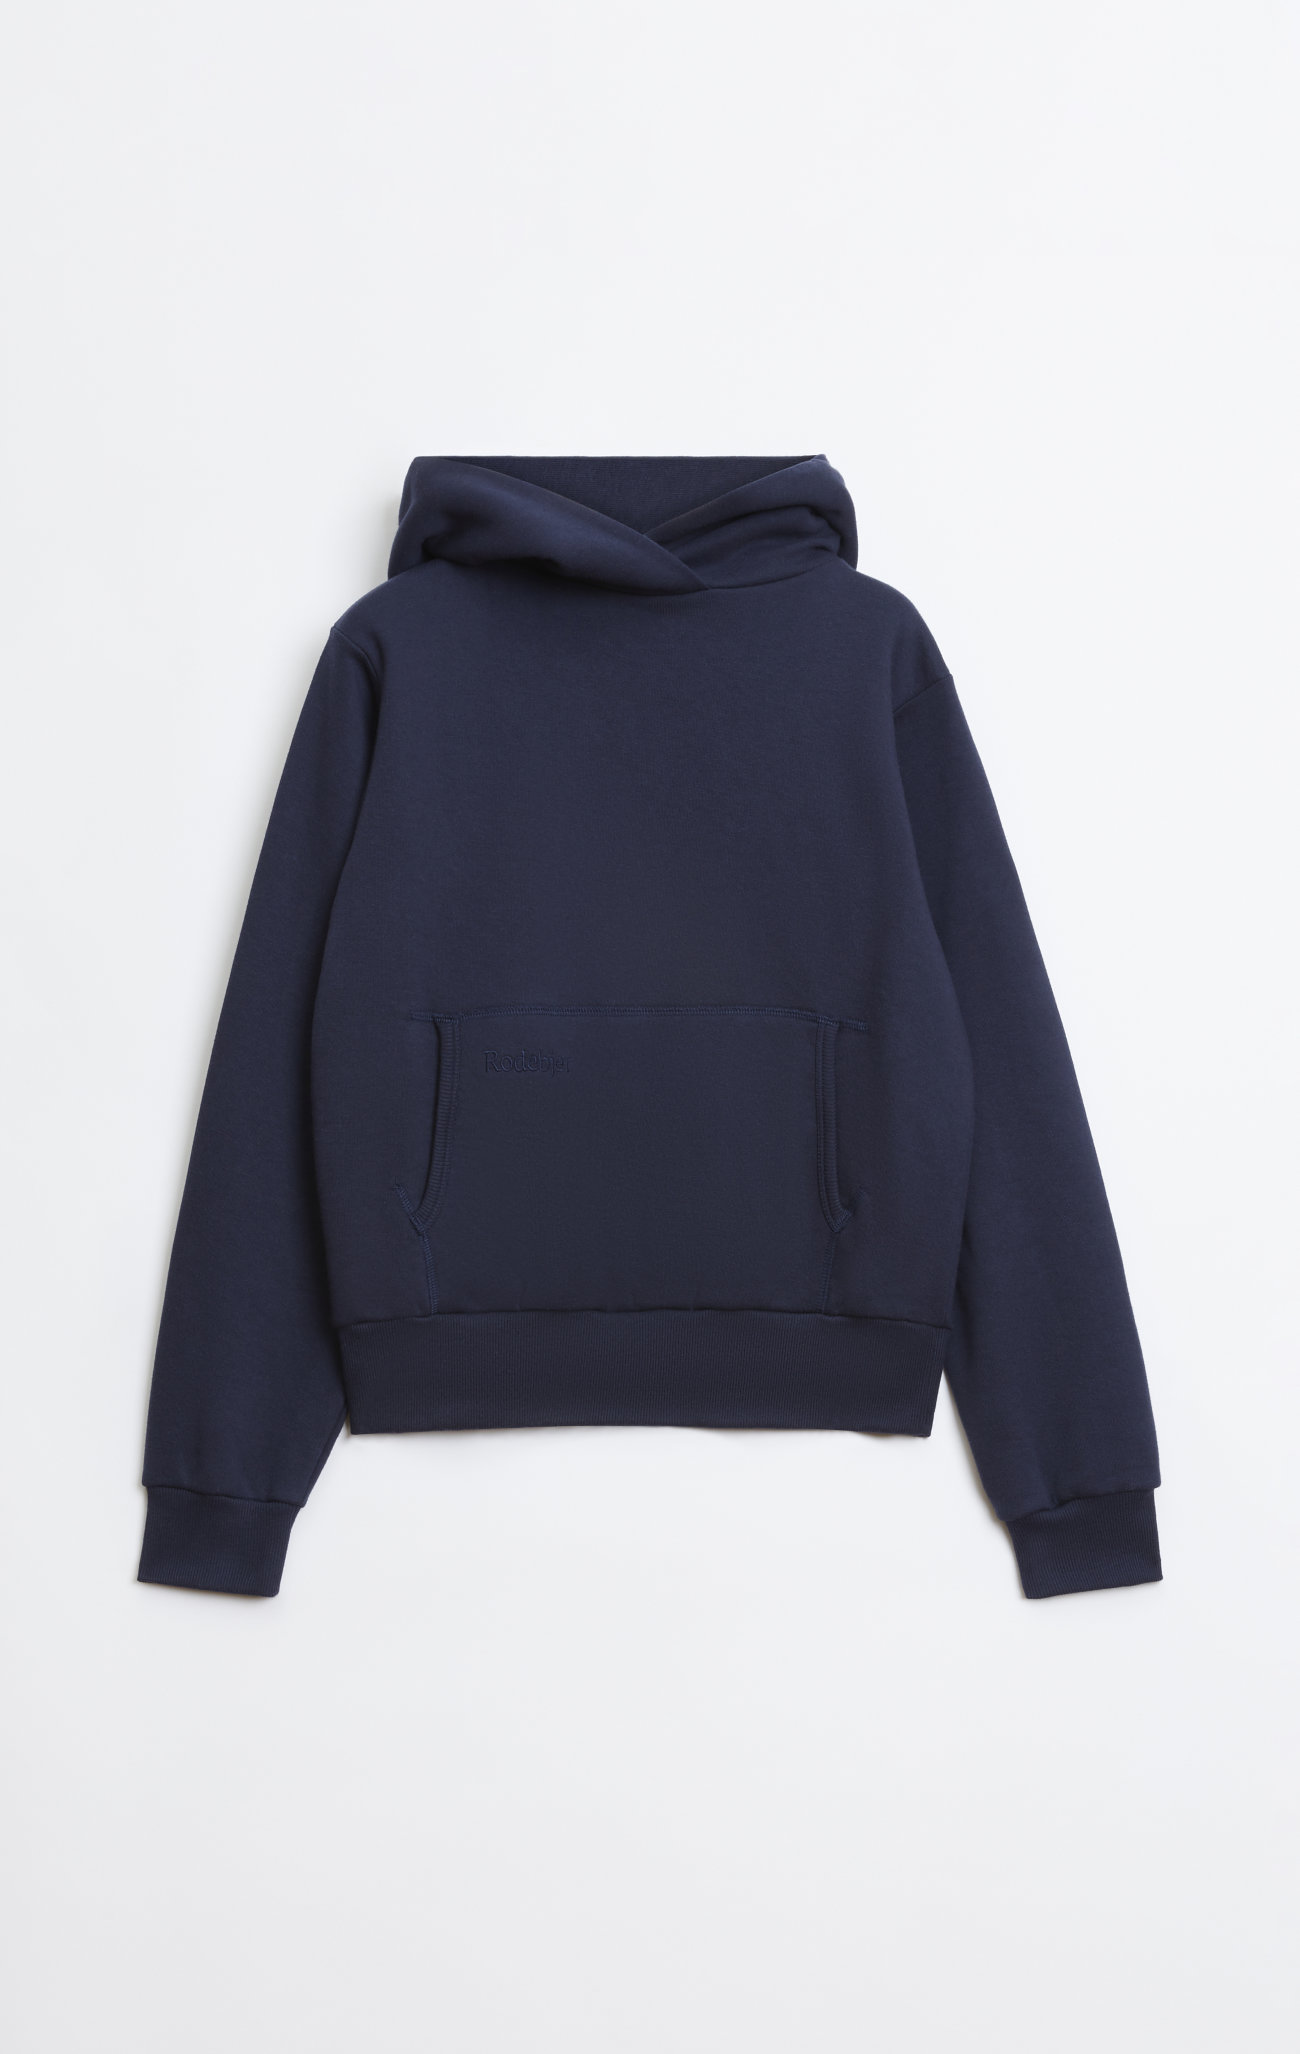 Rodebjer Hoodie Marquessa - Navy | Rodebjer